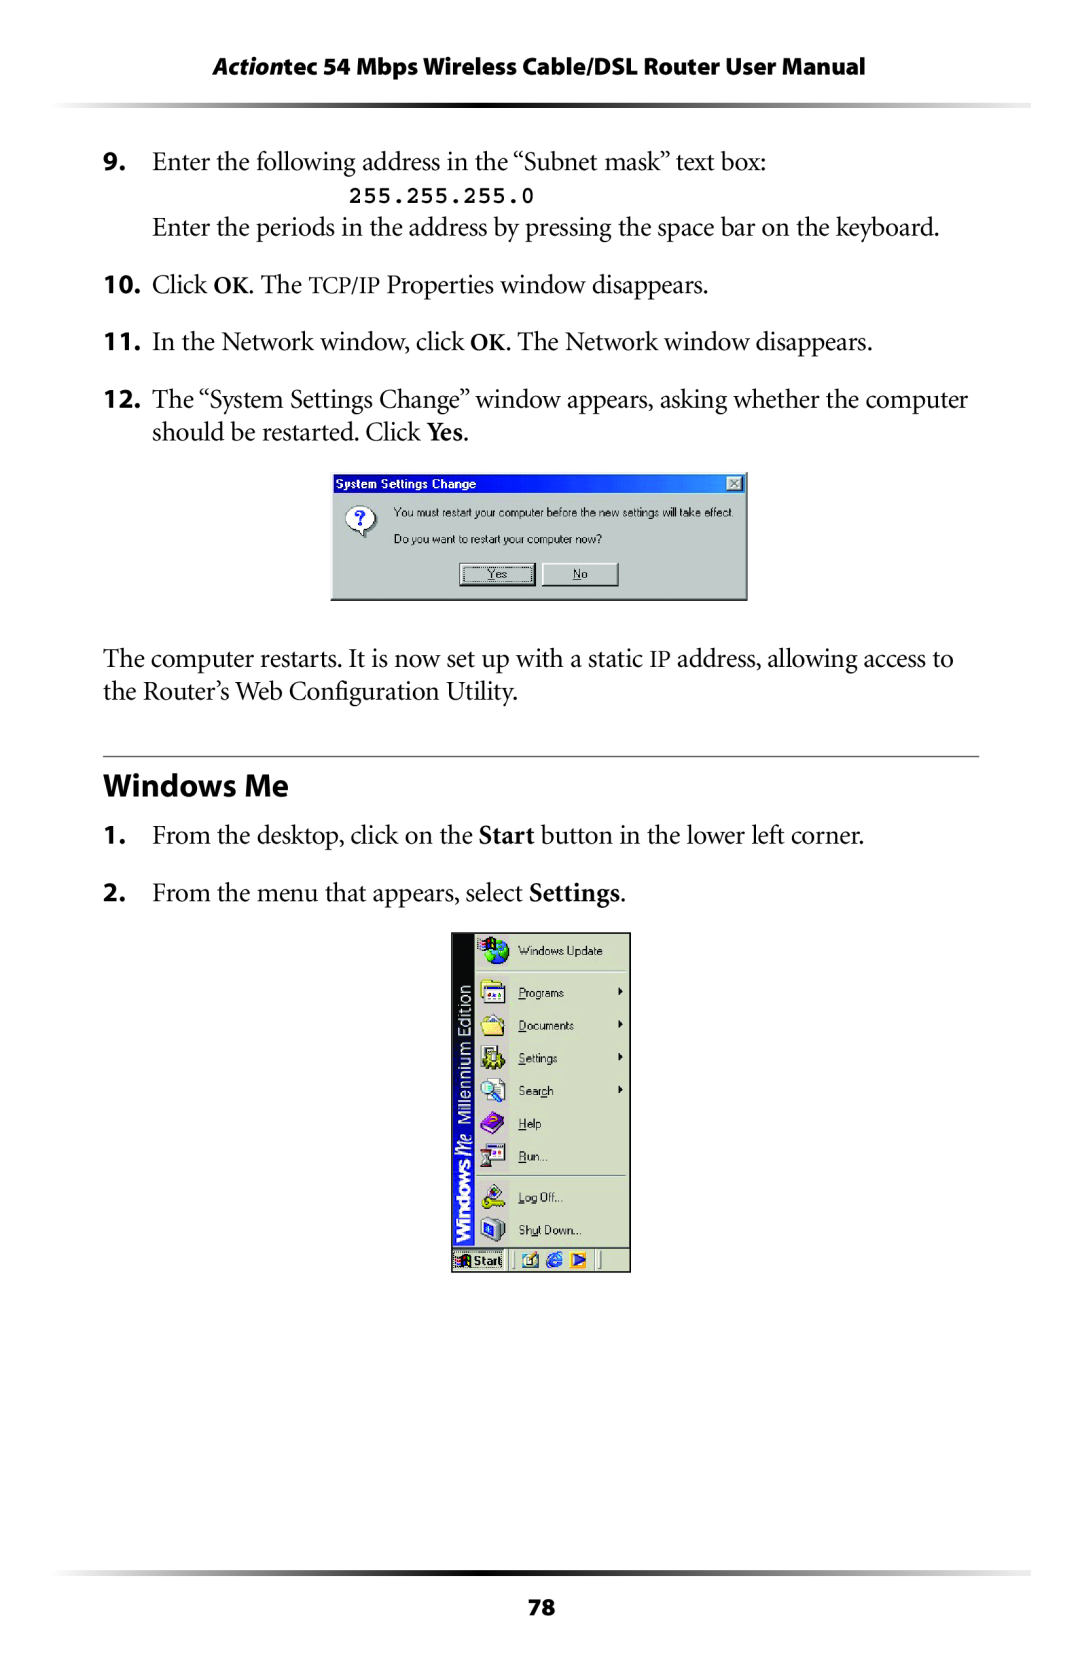 Actiontec electronic GT704WR user manual Windows Me 